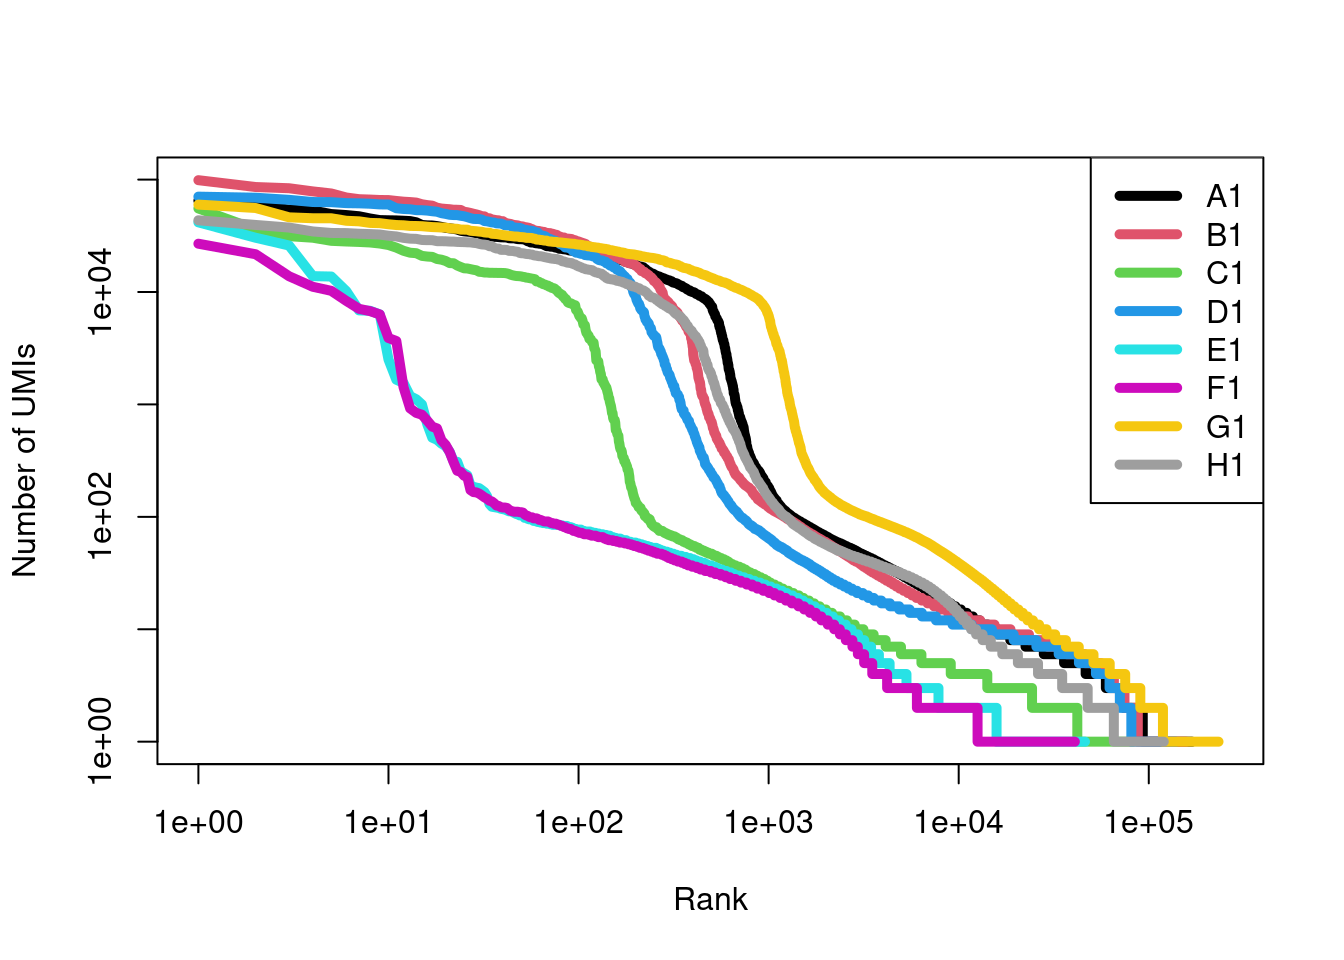 Barcode rank curves for all samples in the HiSeq 4000-sequenced mammary gland dataset, after removing any swapped molecules.